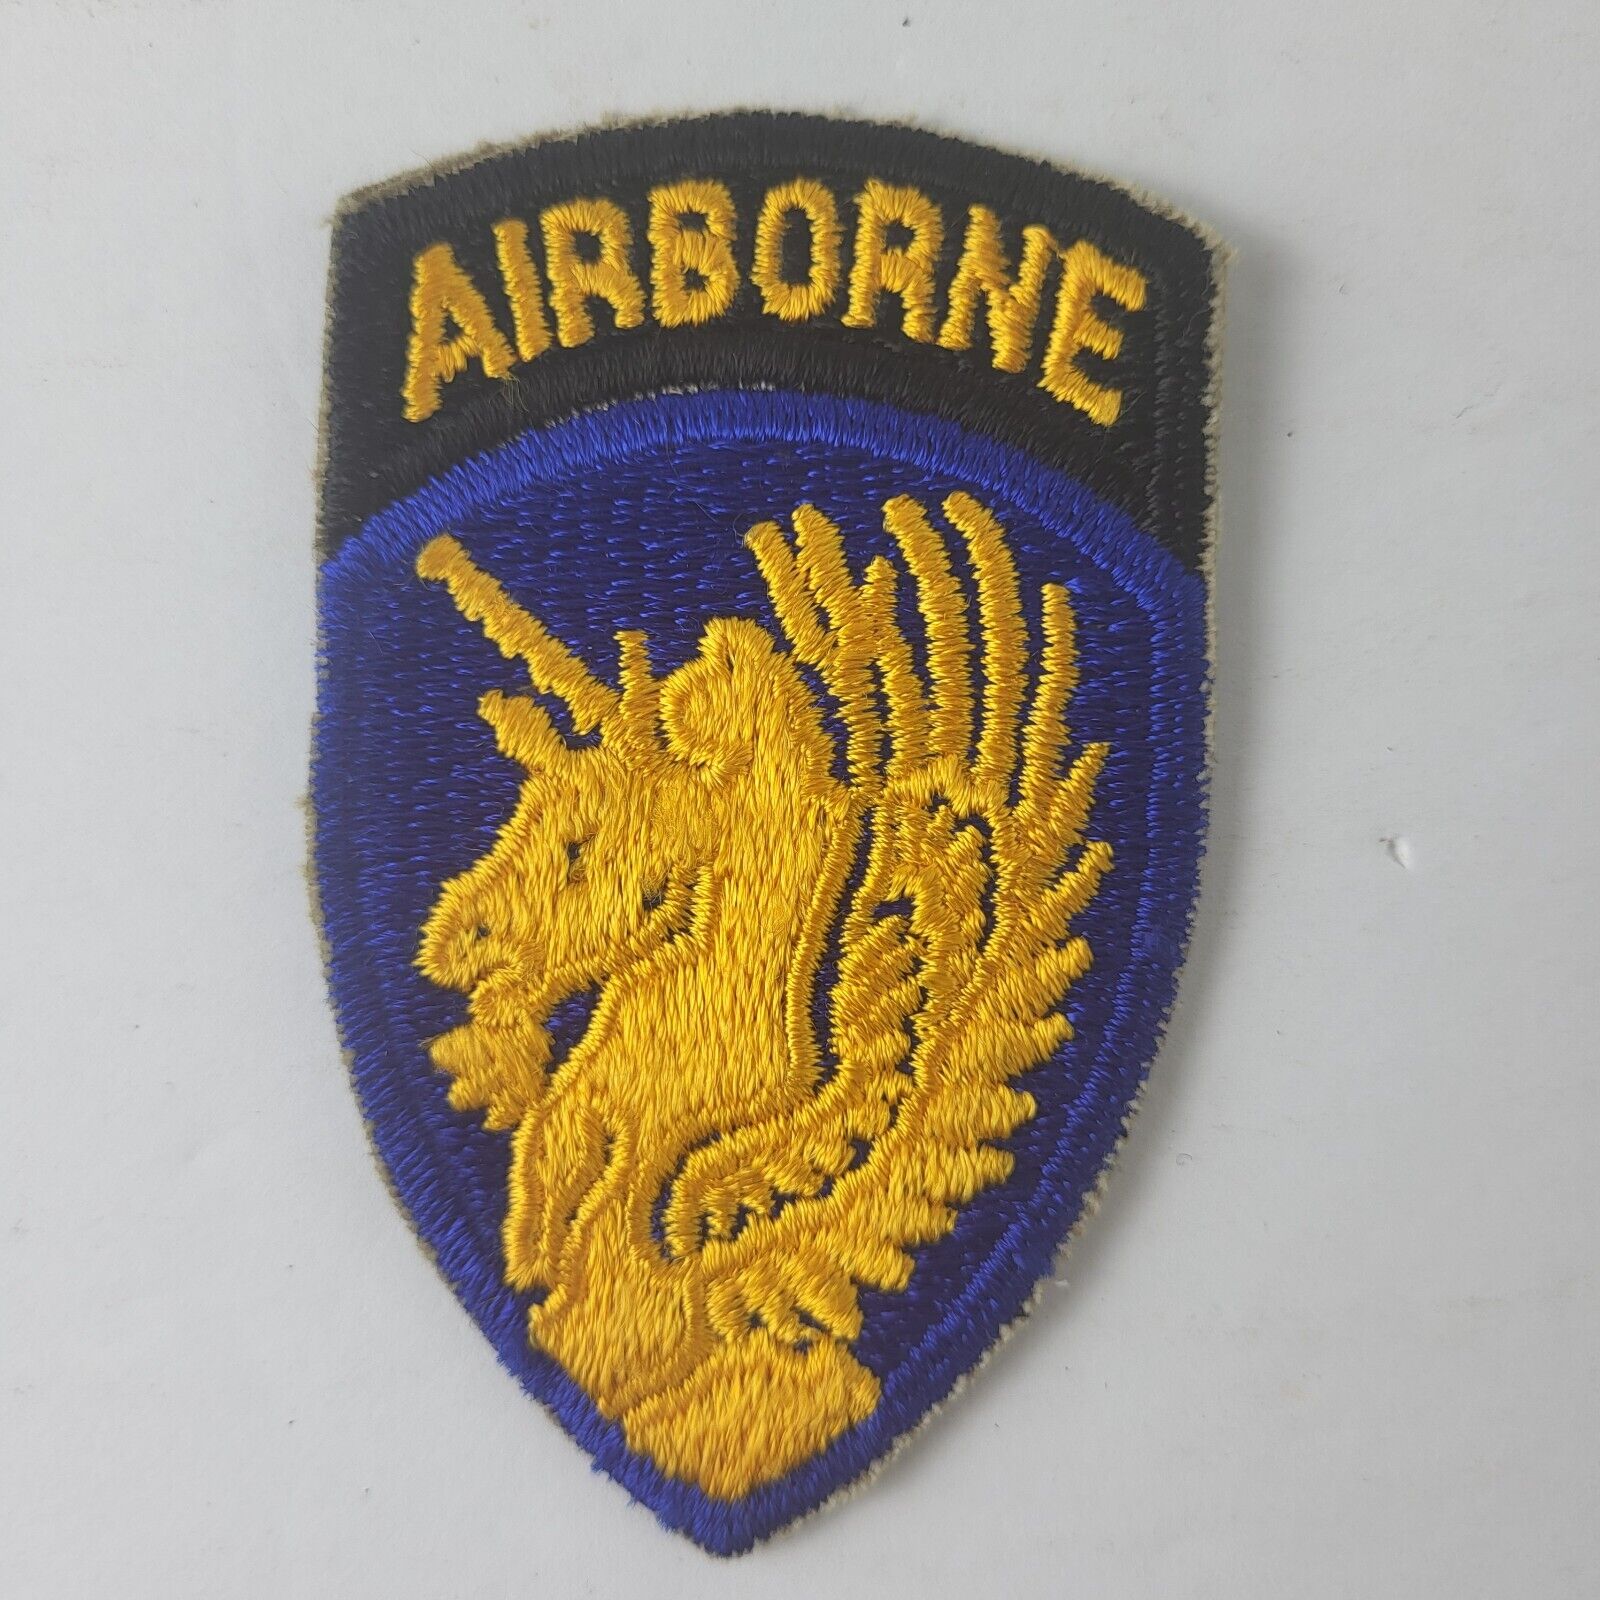 Army 13th Airborne Division Military World War II Tab Pegasus Winged Horse Patch